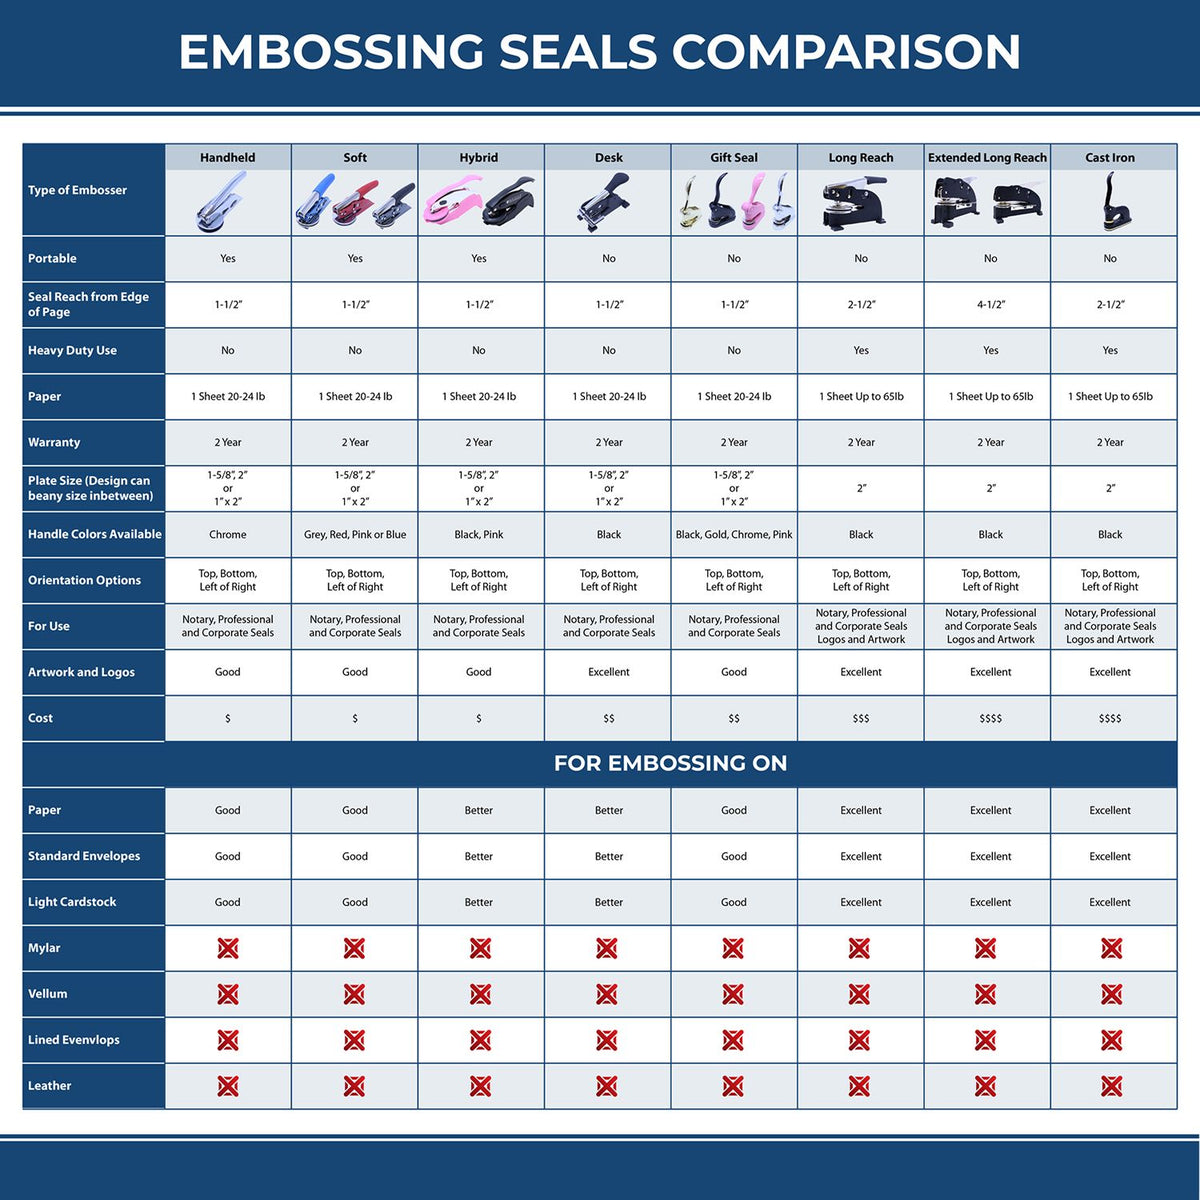 A comparison chart for the different types of mount models available for the Handheld Kentucky Land Surveyor Seal.